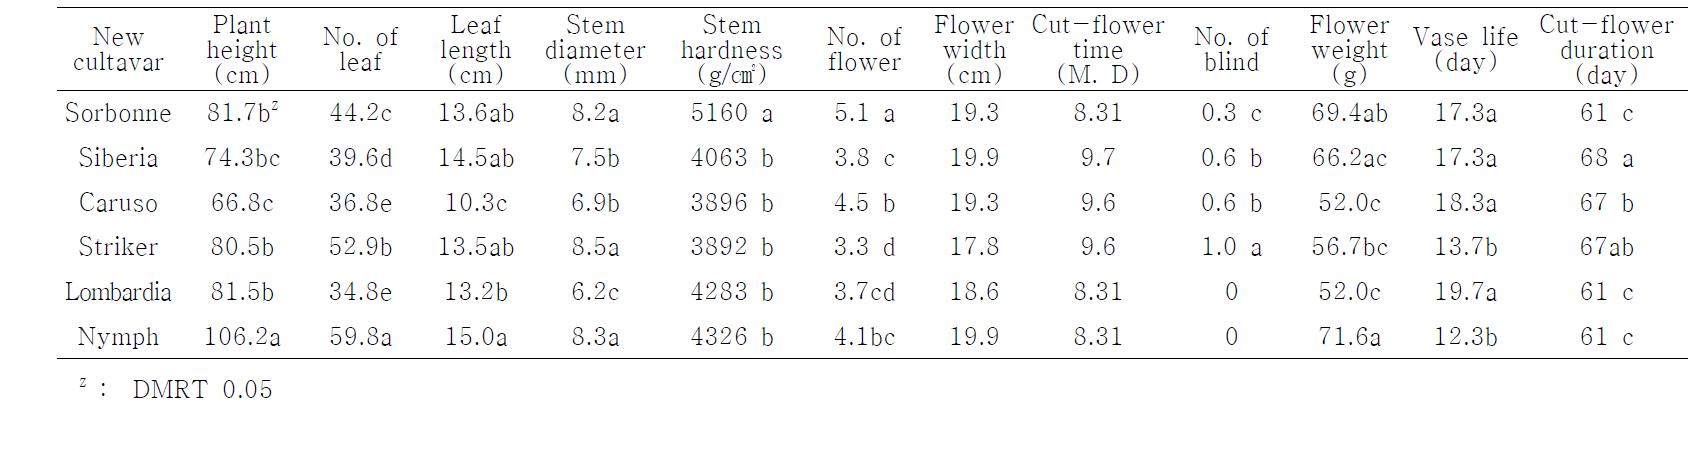 Comparison of plant growth and cut-flower characteristic on planting time(7.1) Oriental Lilium hybrid new cultivar('10)